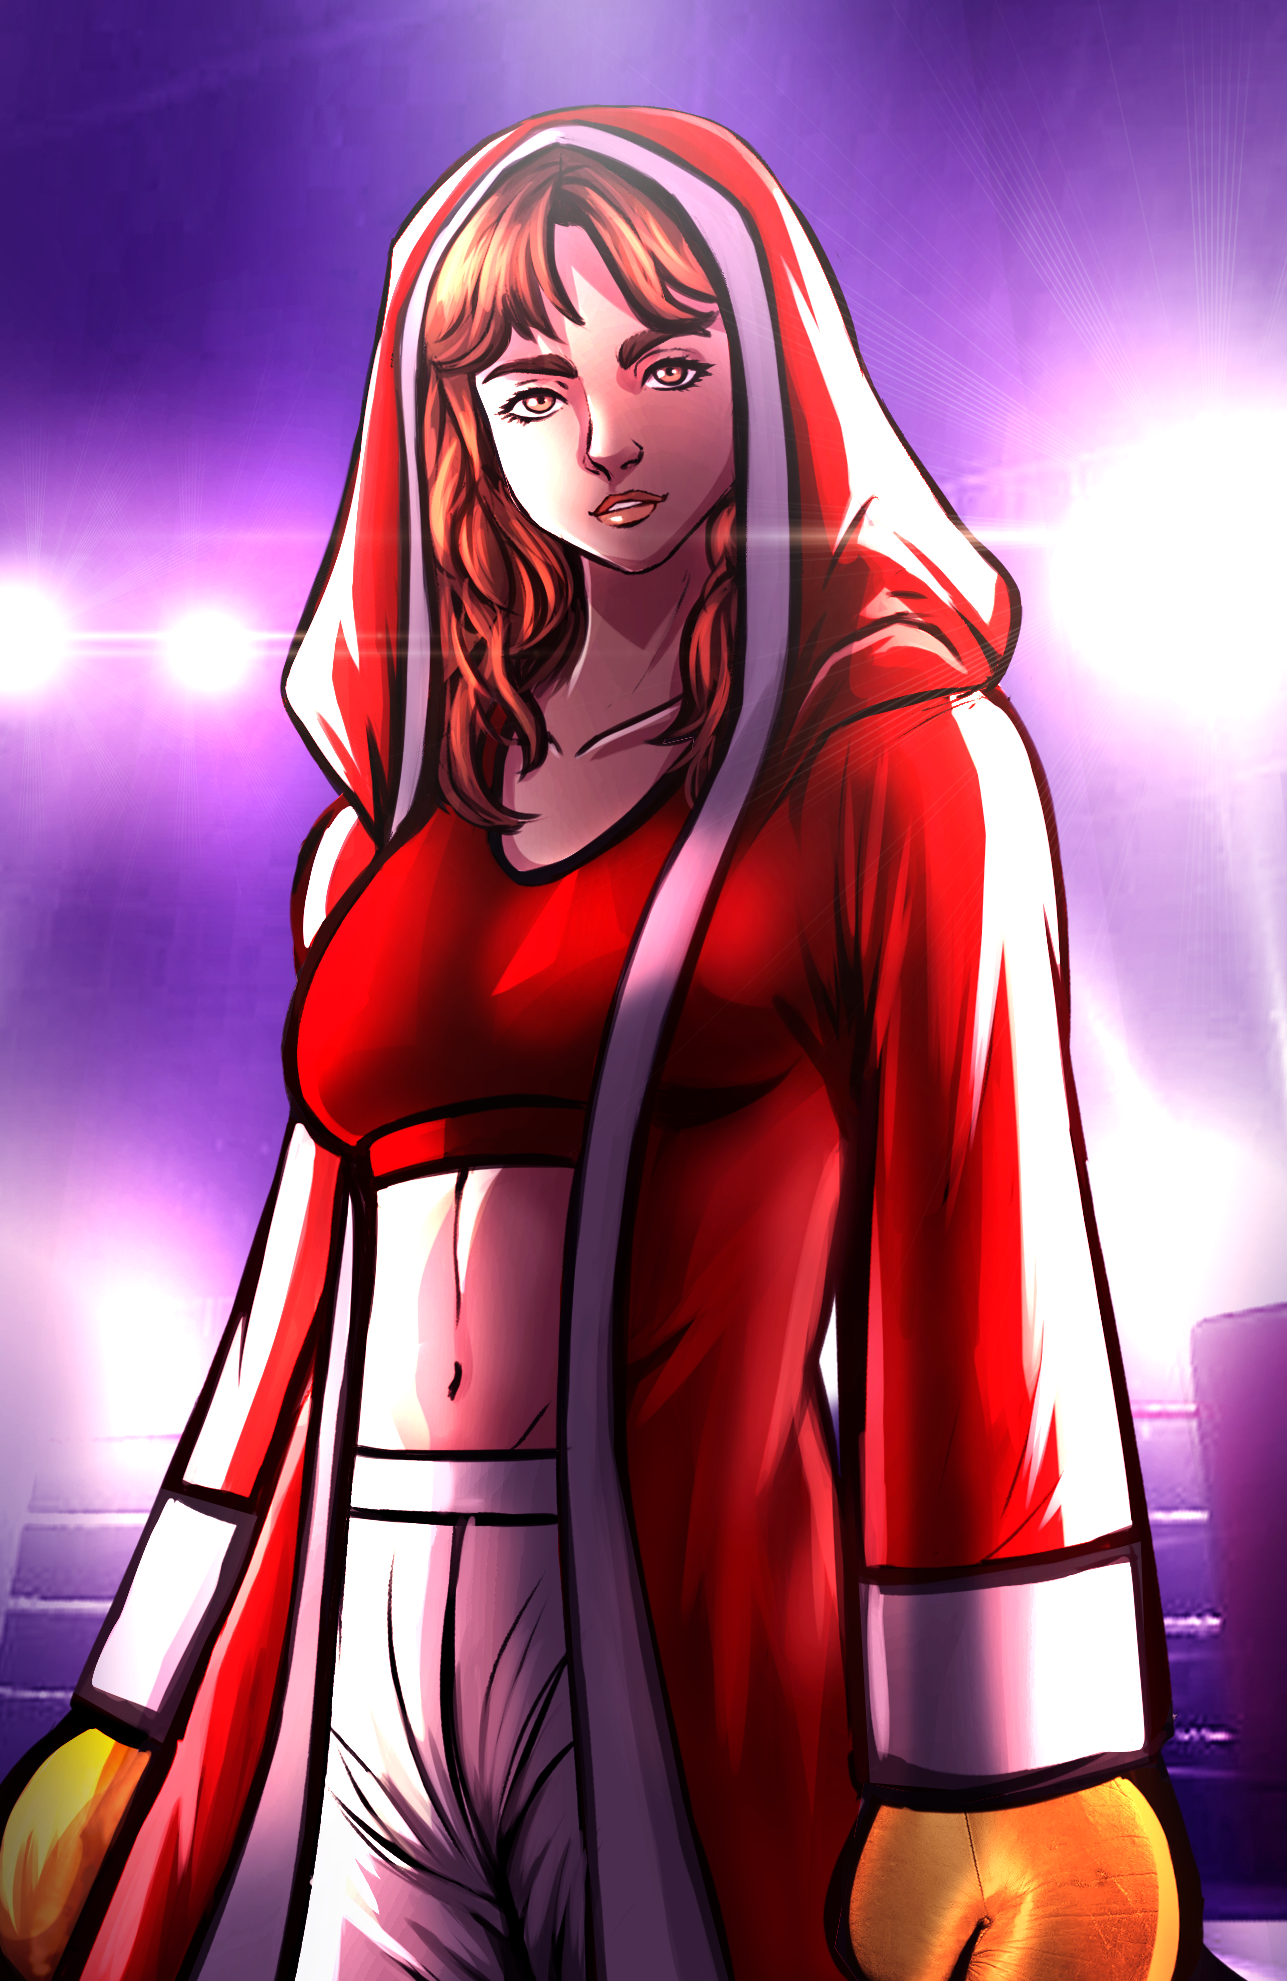 Hermione Granger Boxing poster #2 by TV225 on DeviantArt